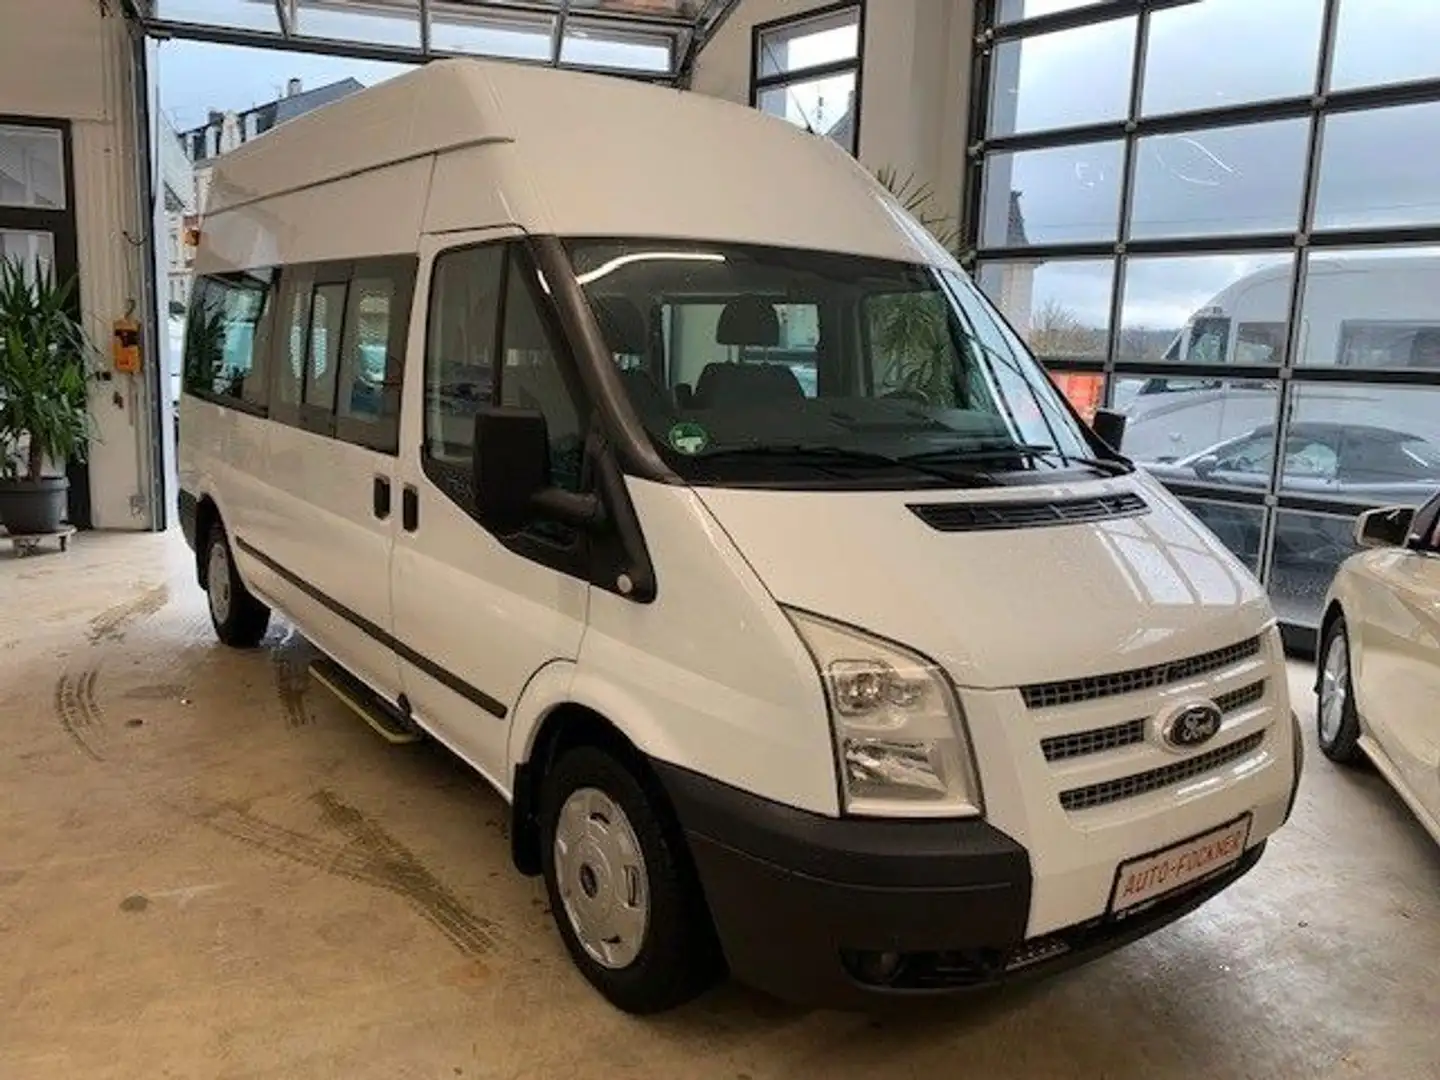 Ford Transit 2.2 TDCi extrahoch lang Lift Systemboden Blanc - 1